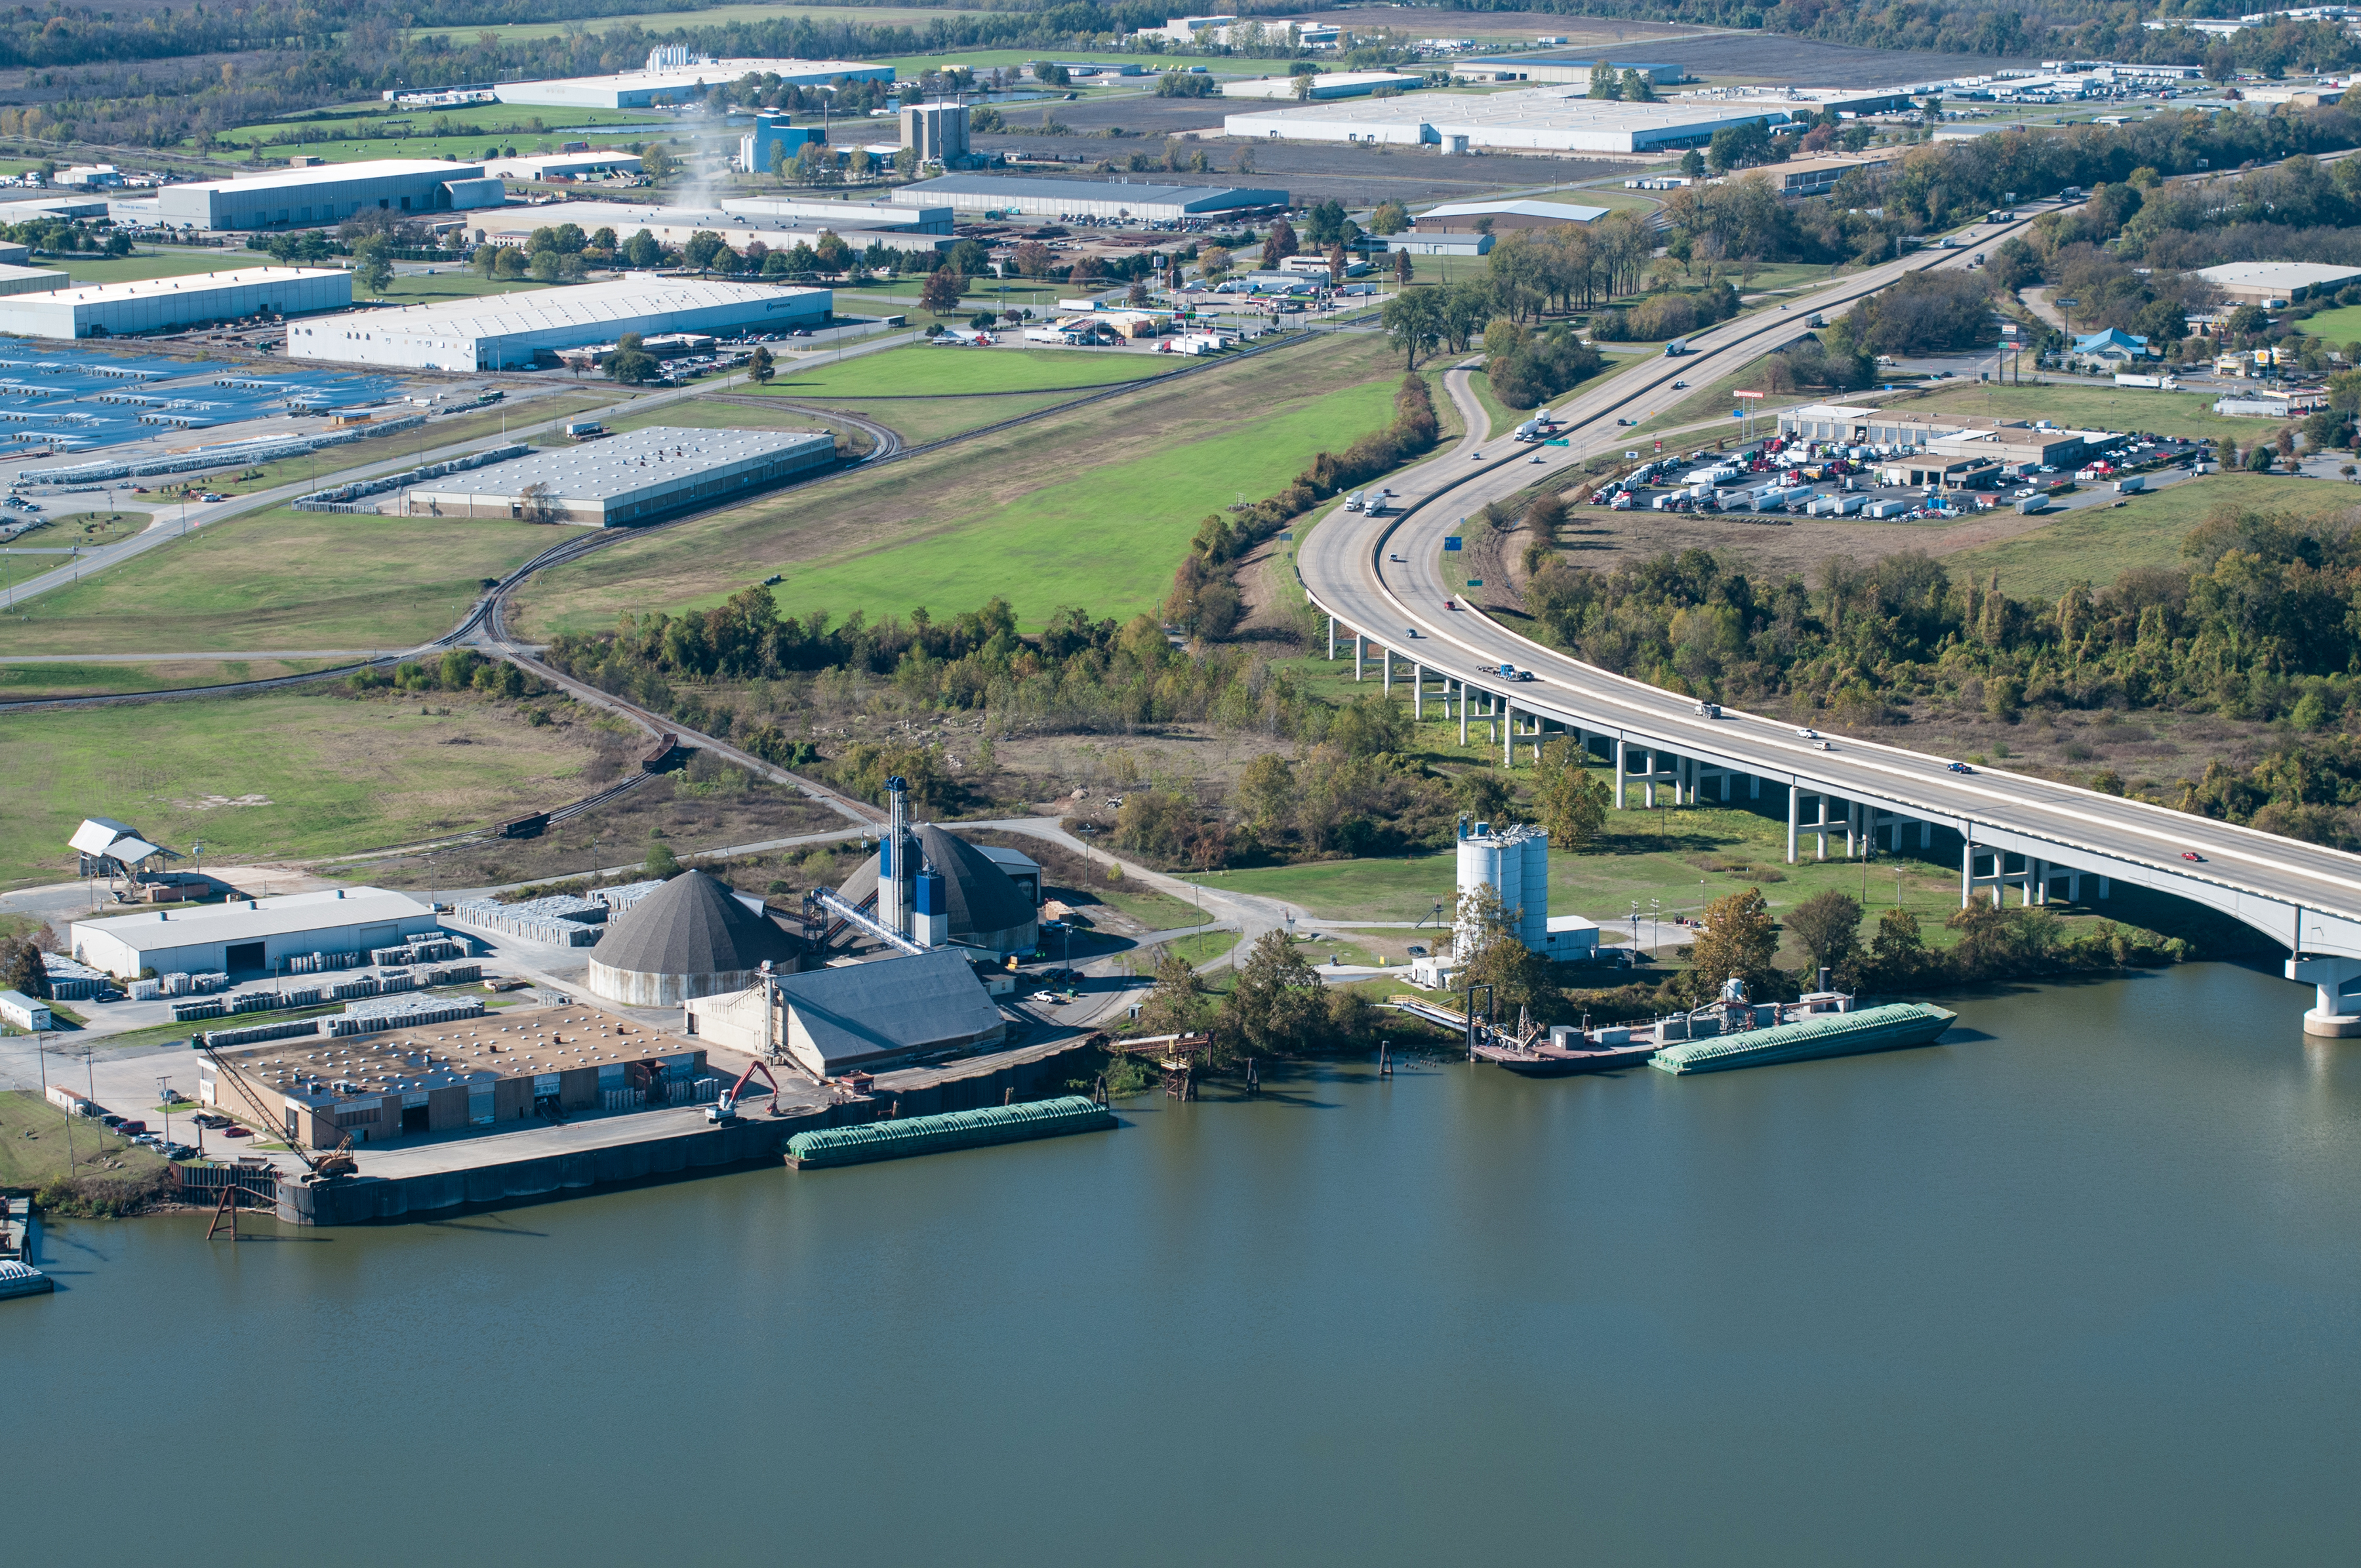 The Port of Little Rock is situated on a 2,640-acre industrial park with rail, road and river connections. The port employs approximately 4,000 people.